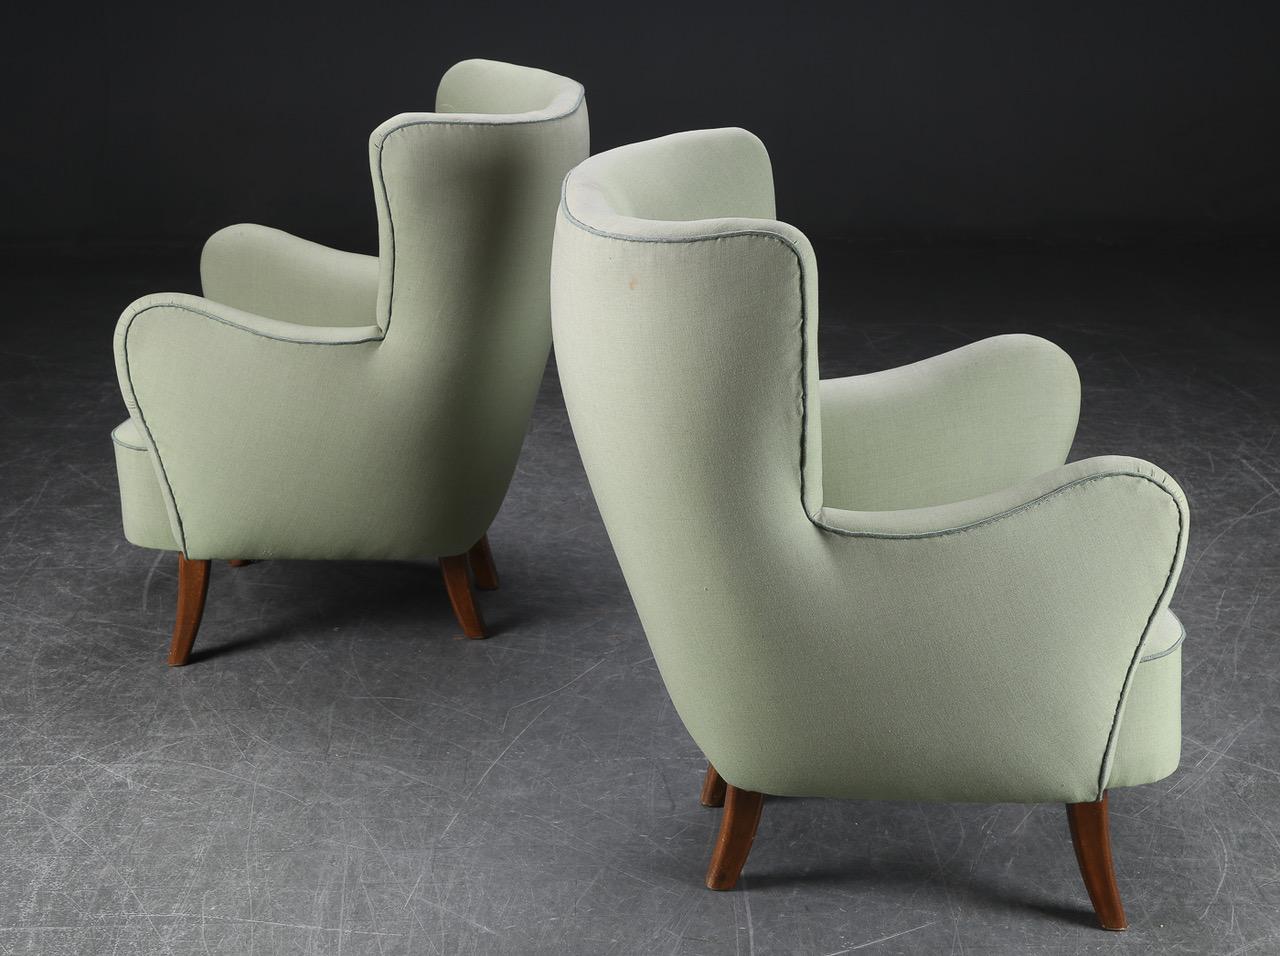 Pair of Danish Modern Alfred Christensen armchairs, with upholstered arms, upholstered in a grey wool fabric, good form, buttoned backs and very comfortable.